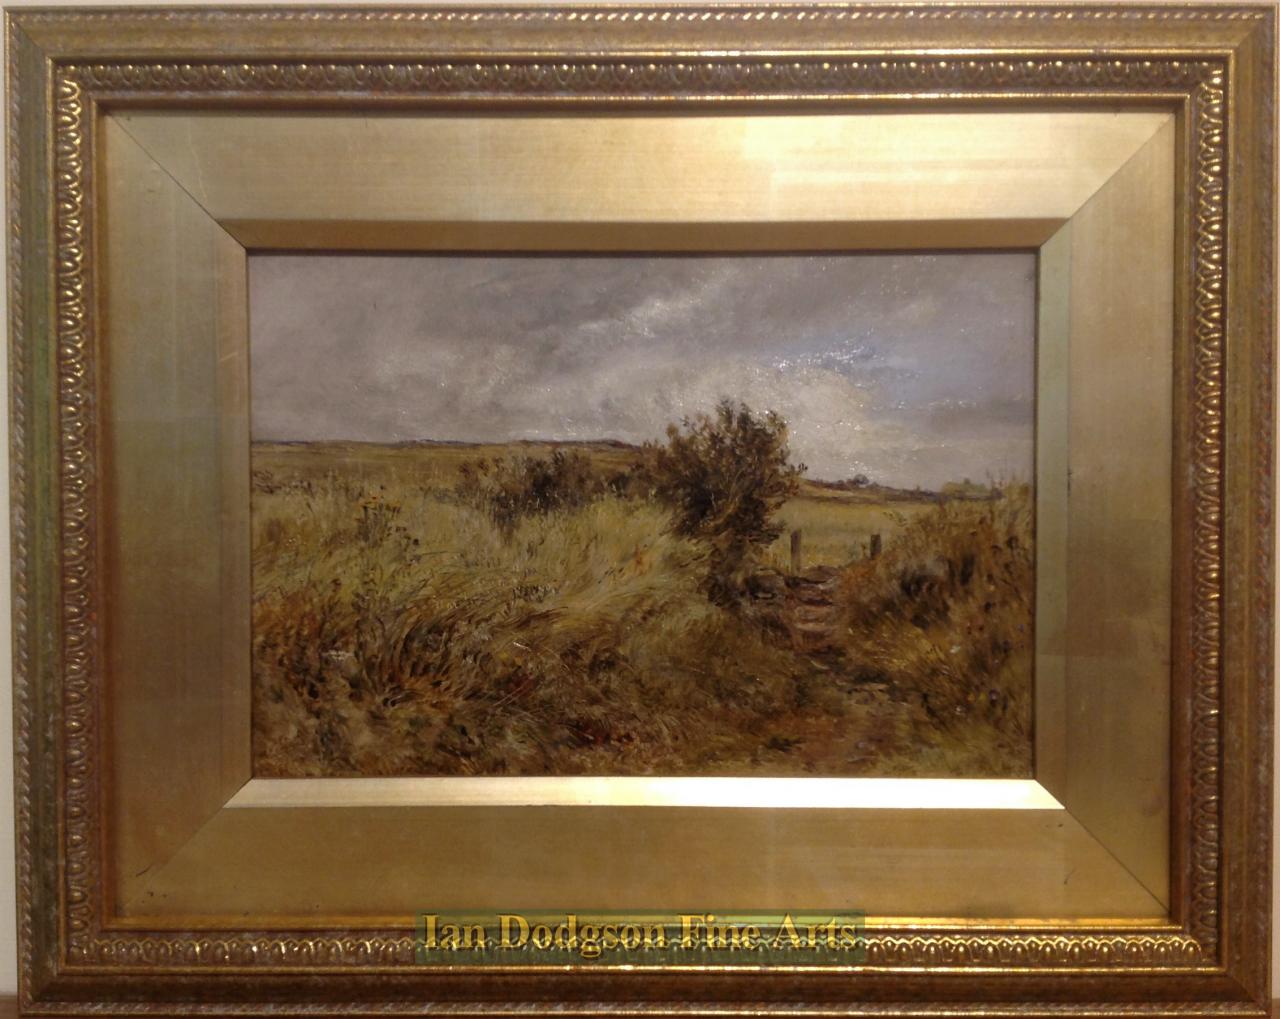 The wind in the grass, Anglesey by William Joseph Julius Caesar Bond 